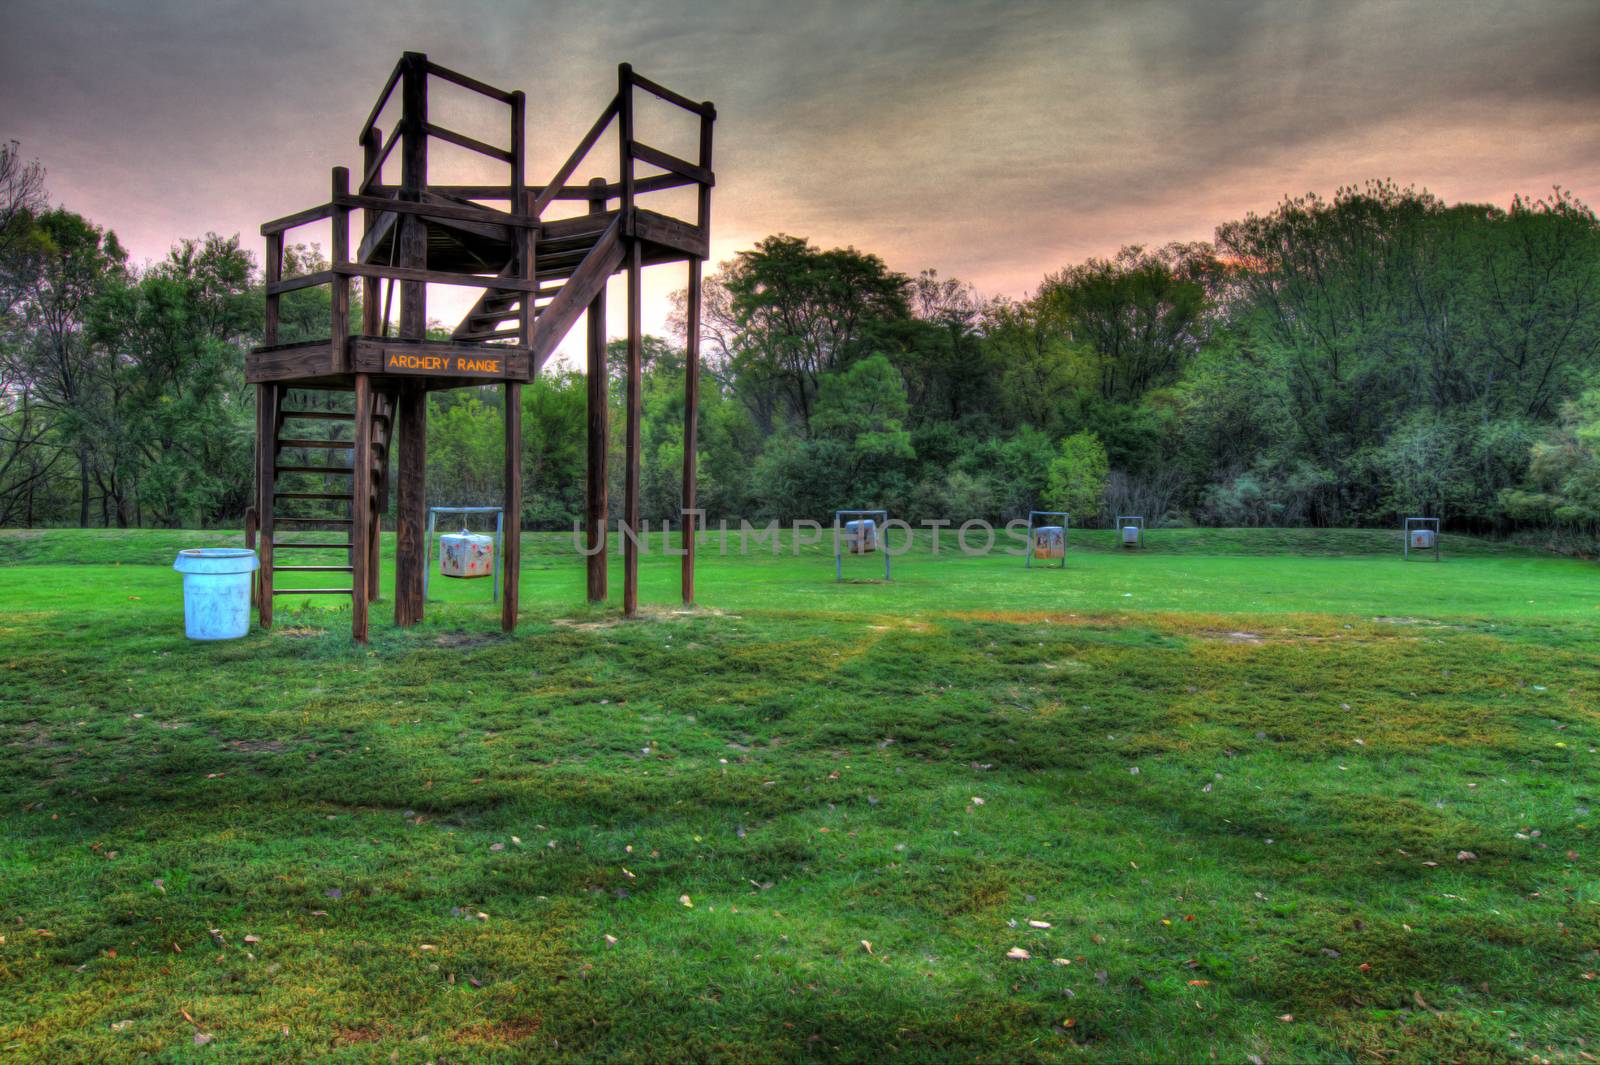 Field archery range at a park in hdr in soft focus